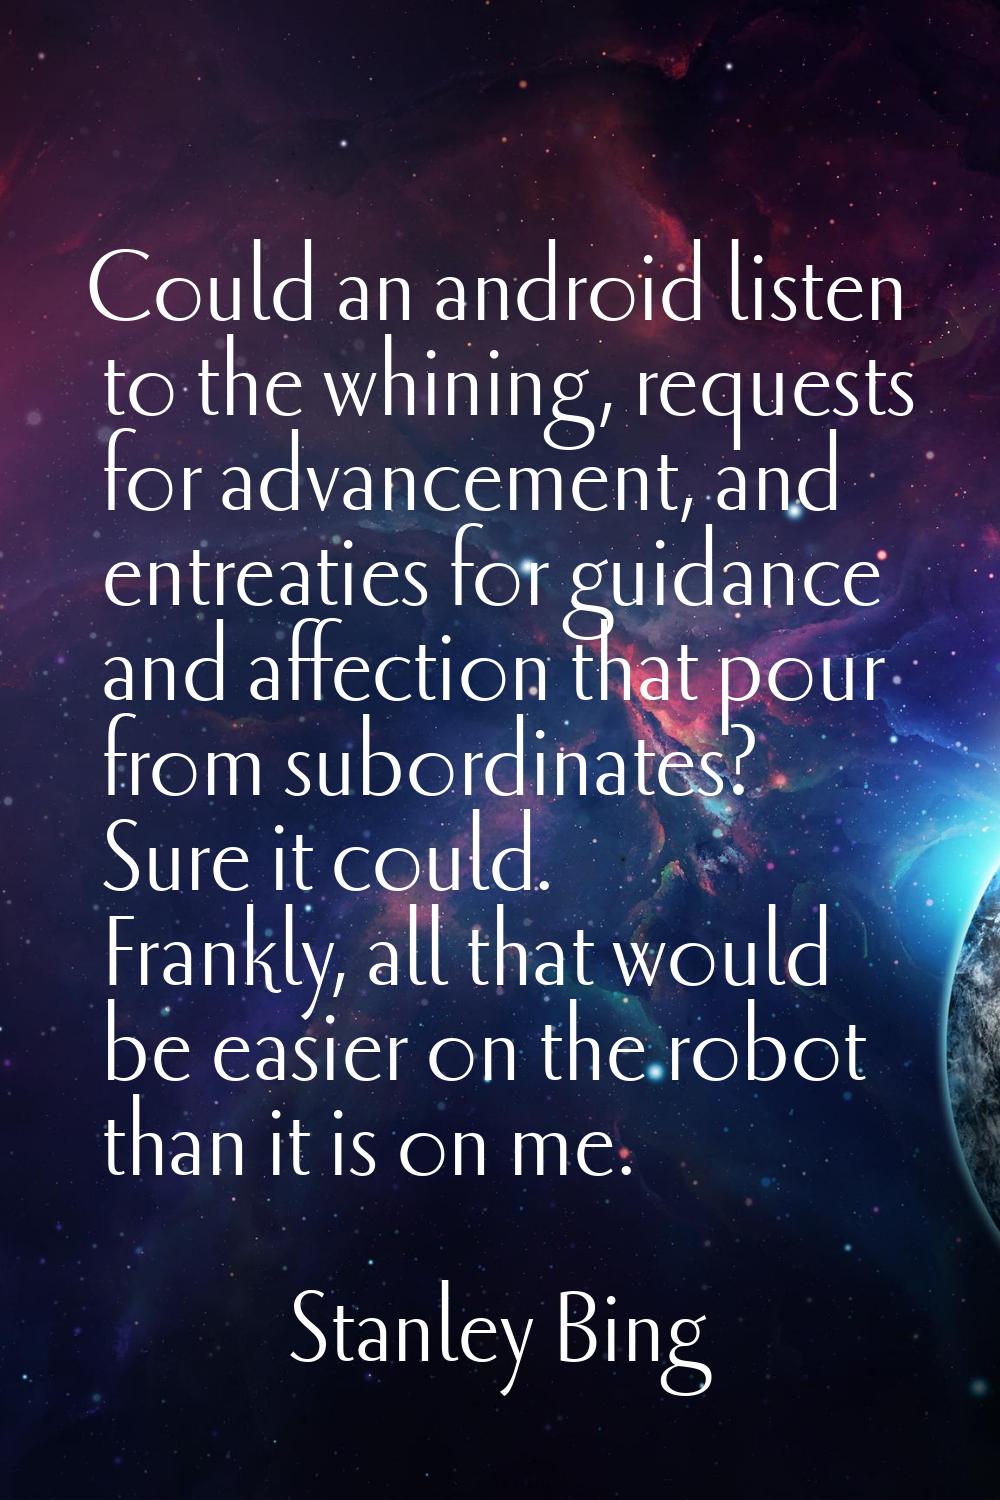 Could an android listen to the whining, requests for advancement, and entreaties for guidance and a